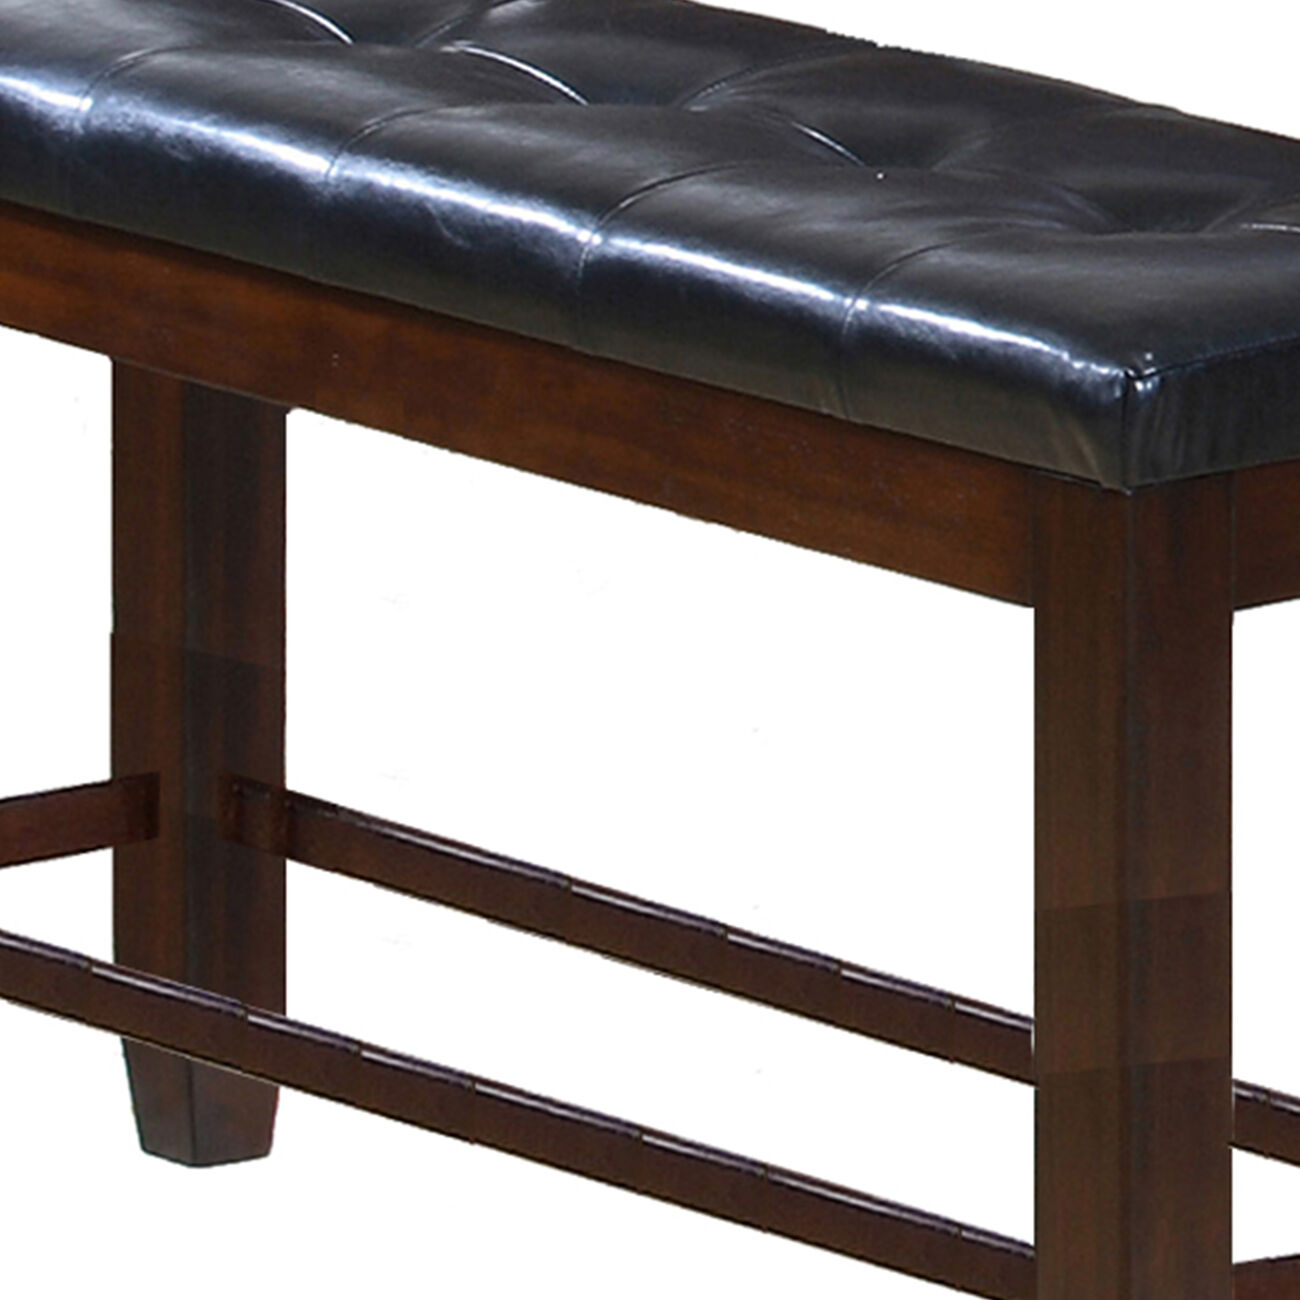 Counter Height Bench with Button Tufted Leatherette Seat, Black and Brown - BM215458